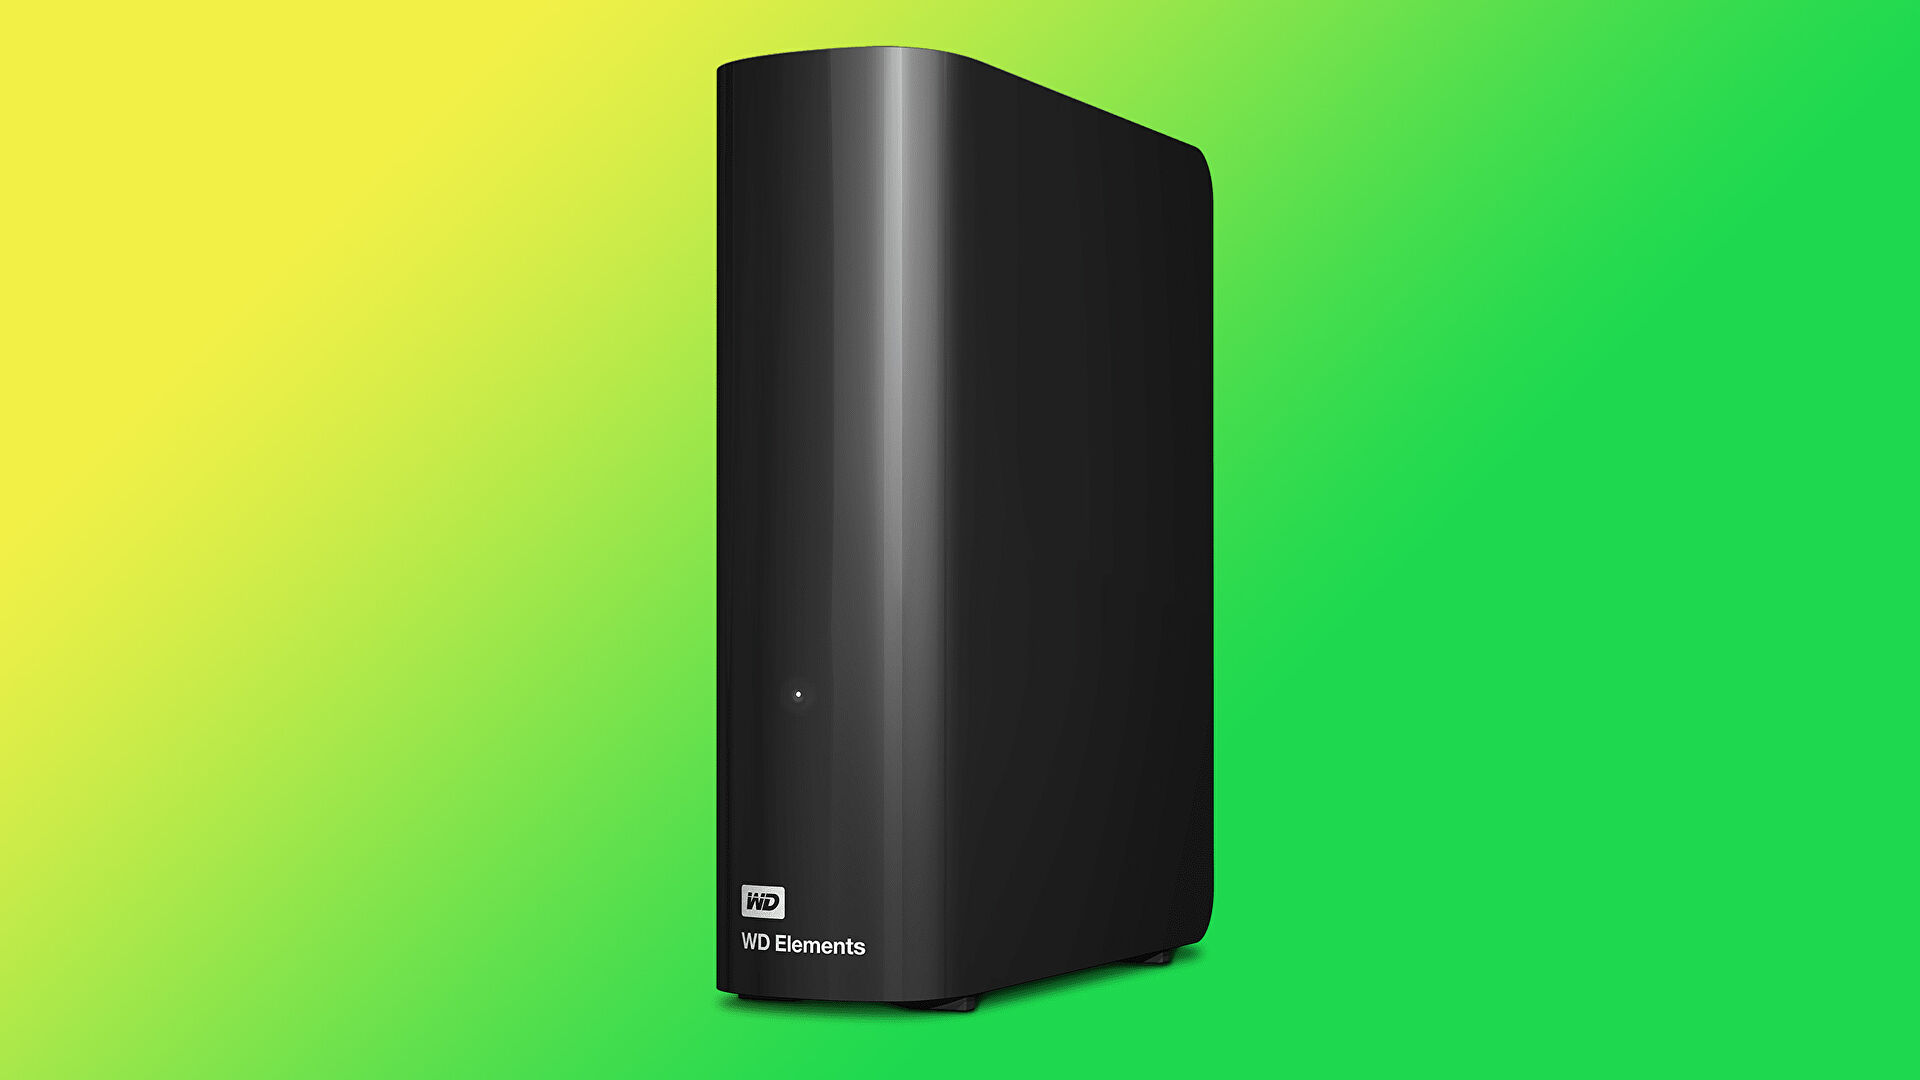 The Best Brands of External Hard Drives in Singapore